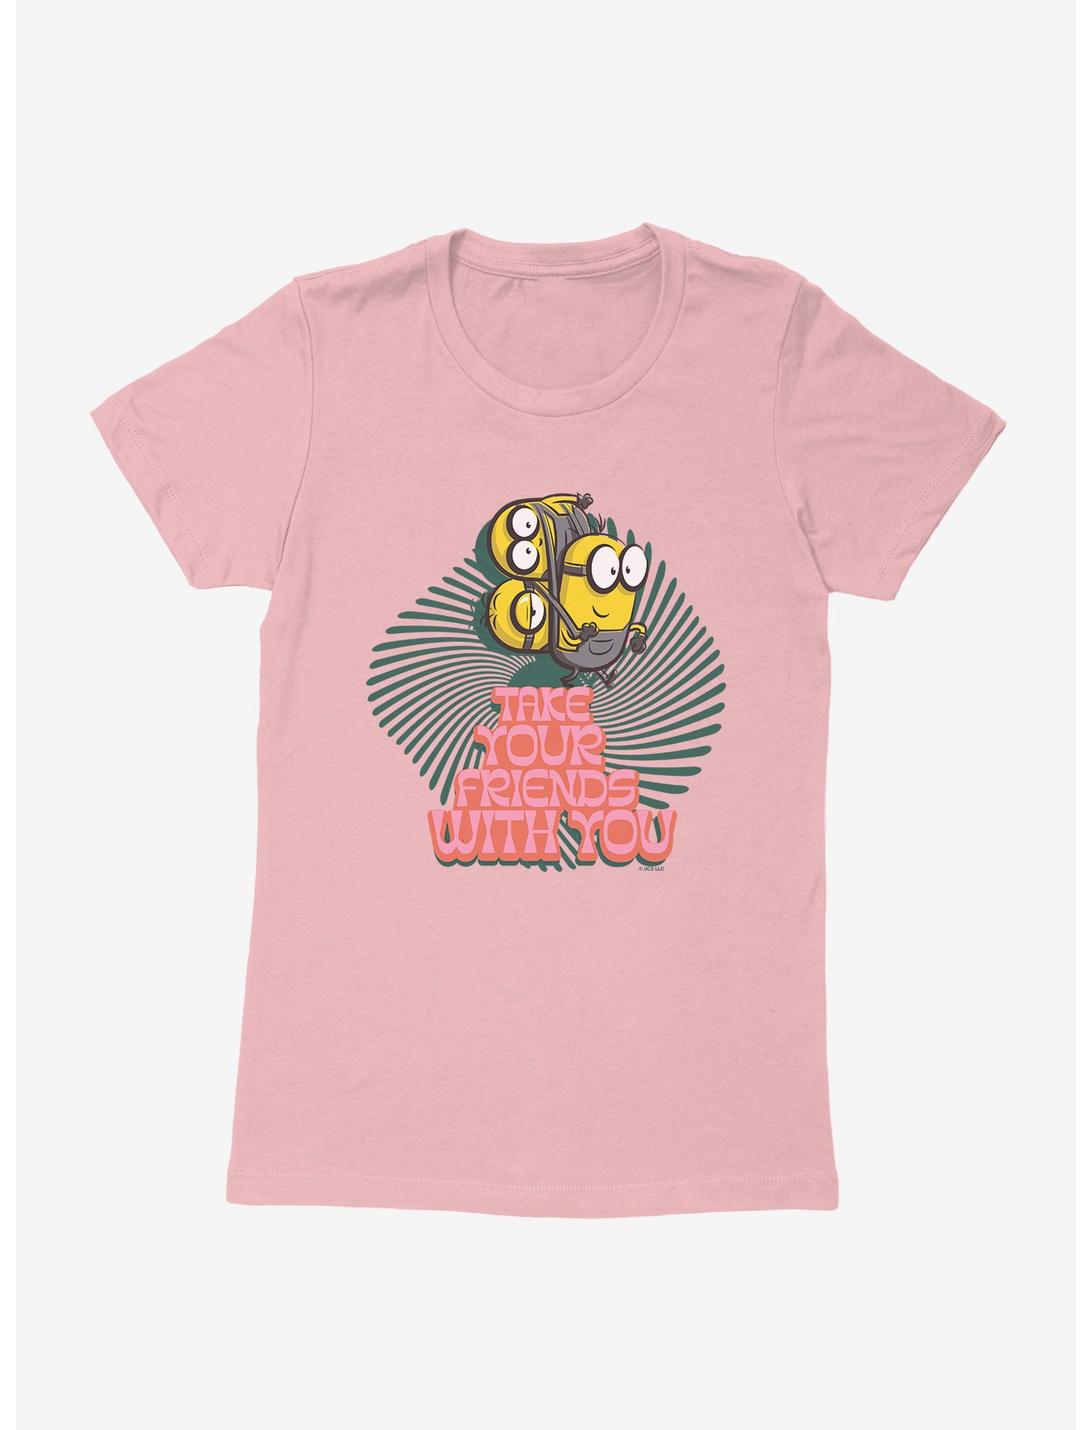 Minions Groovy Take Your Friends Womens T-Shirt, LIGHT PINK, hi-res